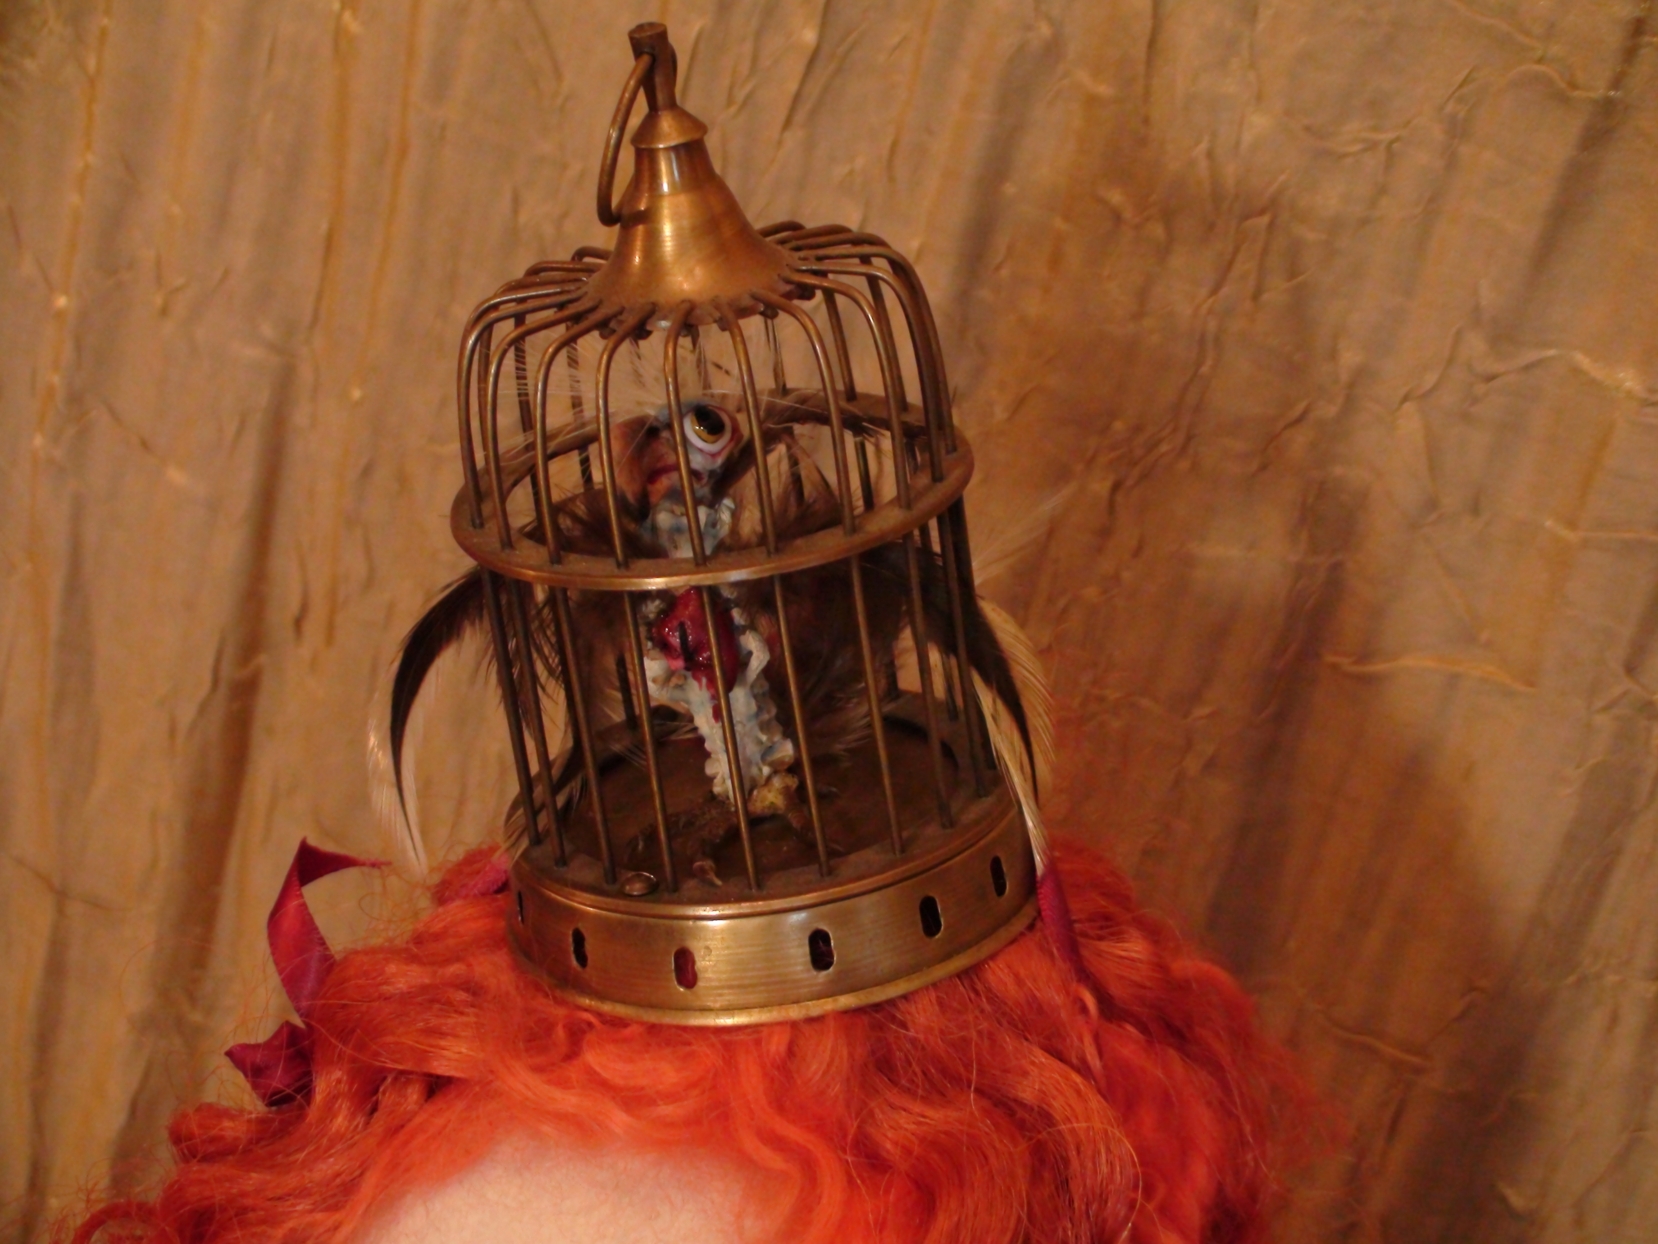 close-up of brass bird cage hat with sculpted bird inside